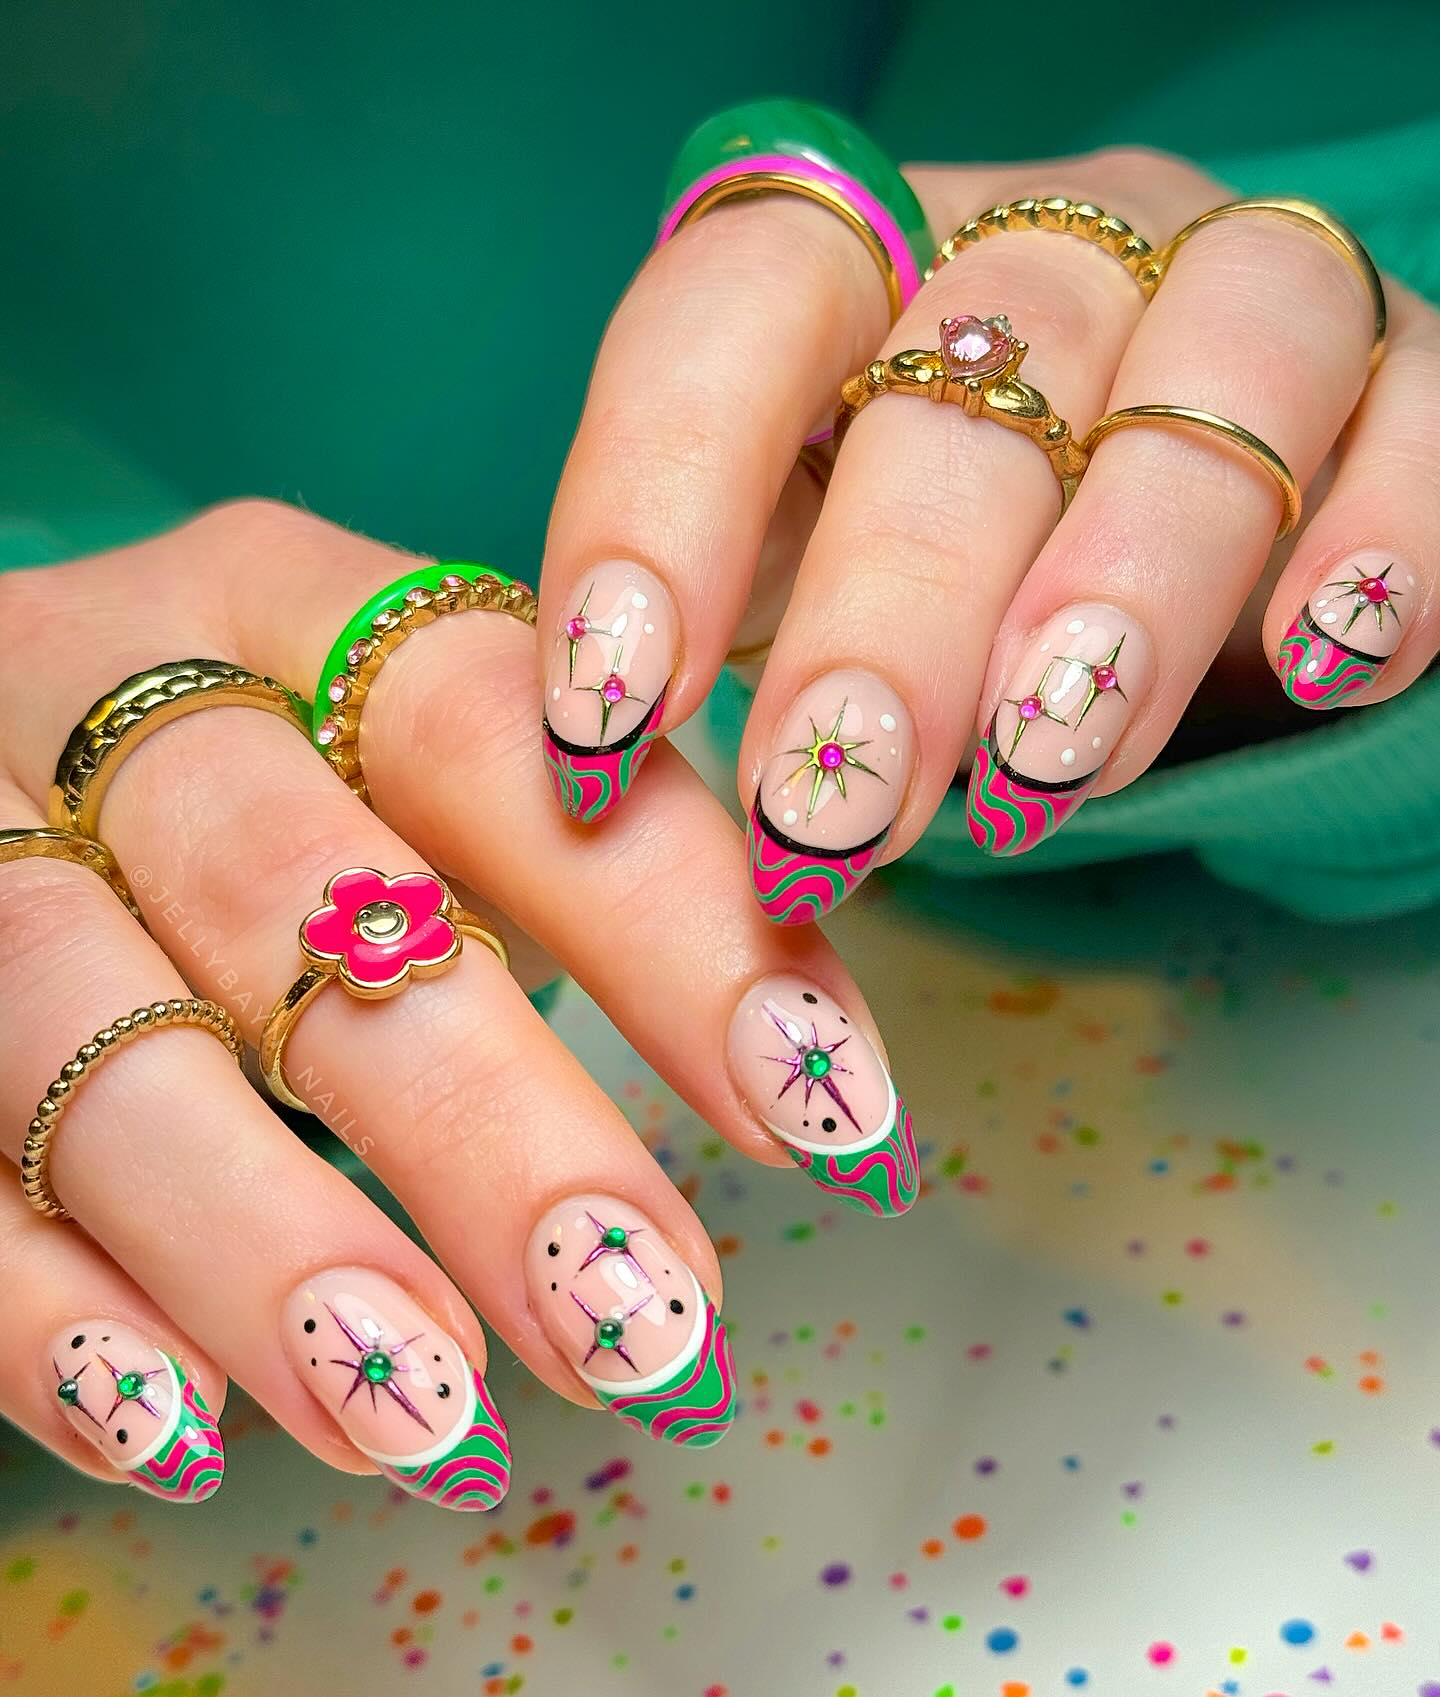 100 Pretty Spring Nail Designs To Try This Year images 88